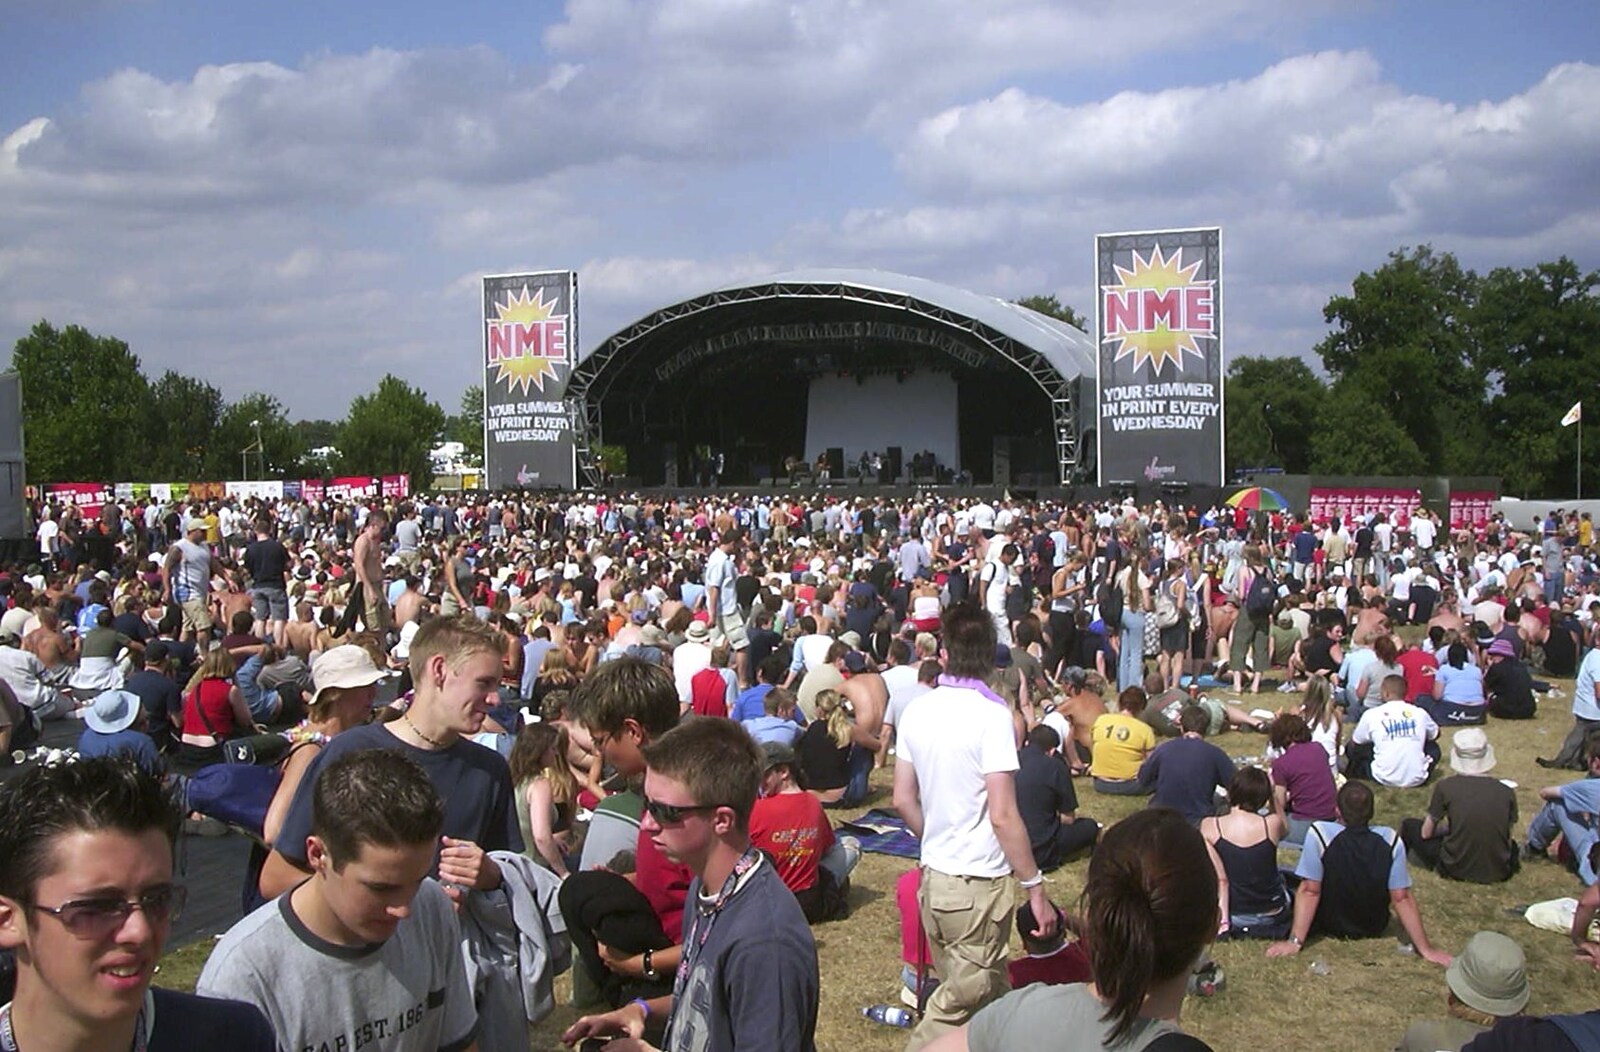 The crowds around the main stage from V Festival 2003, Hyland's Park, Chelmsford, Essex - 16th August 2003